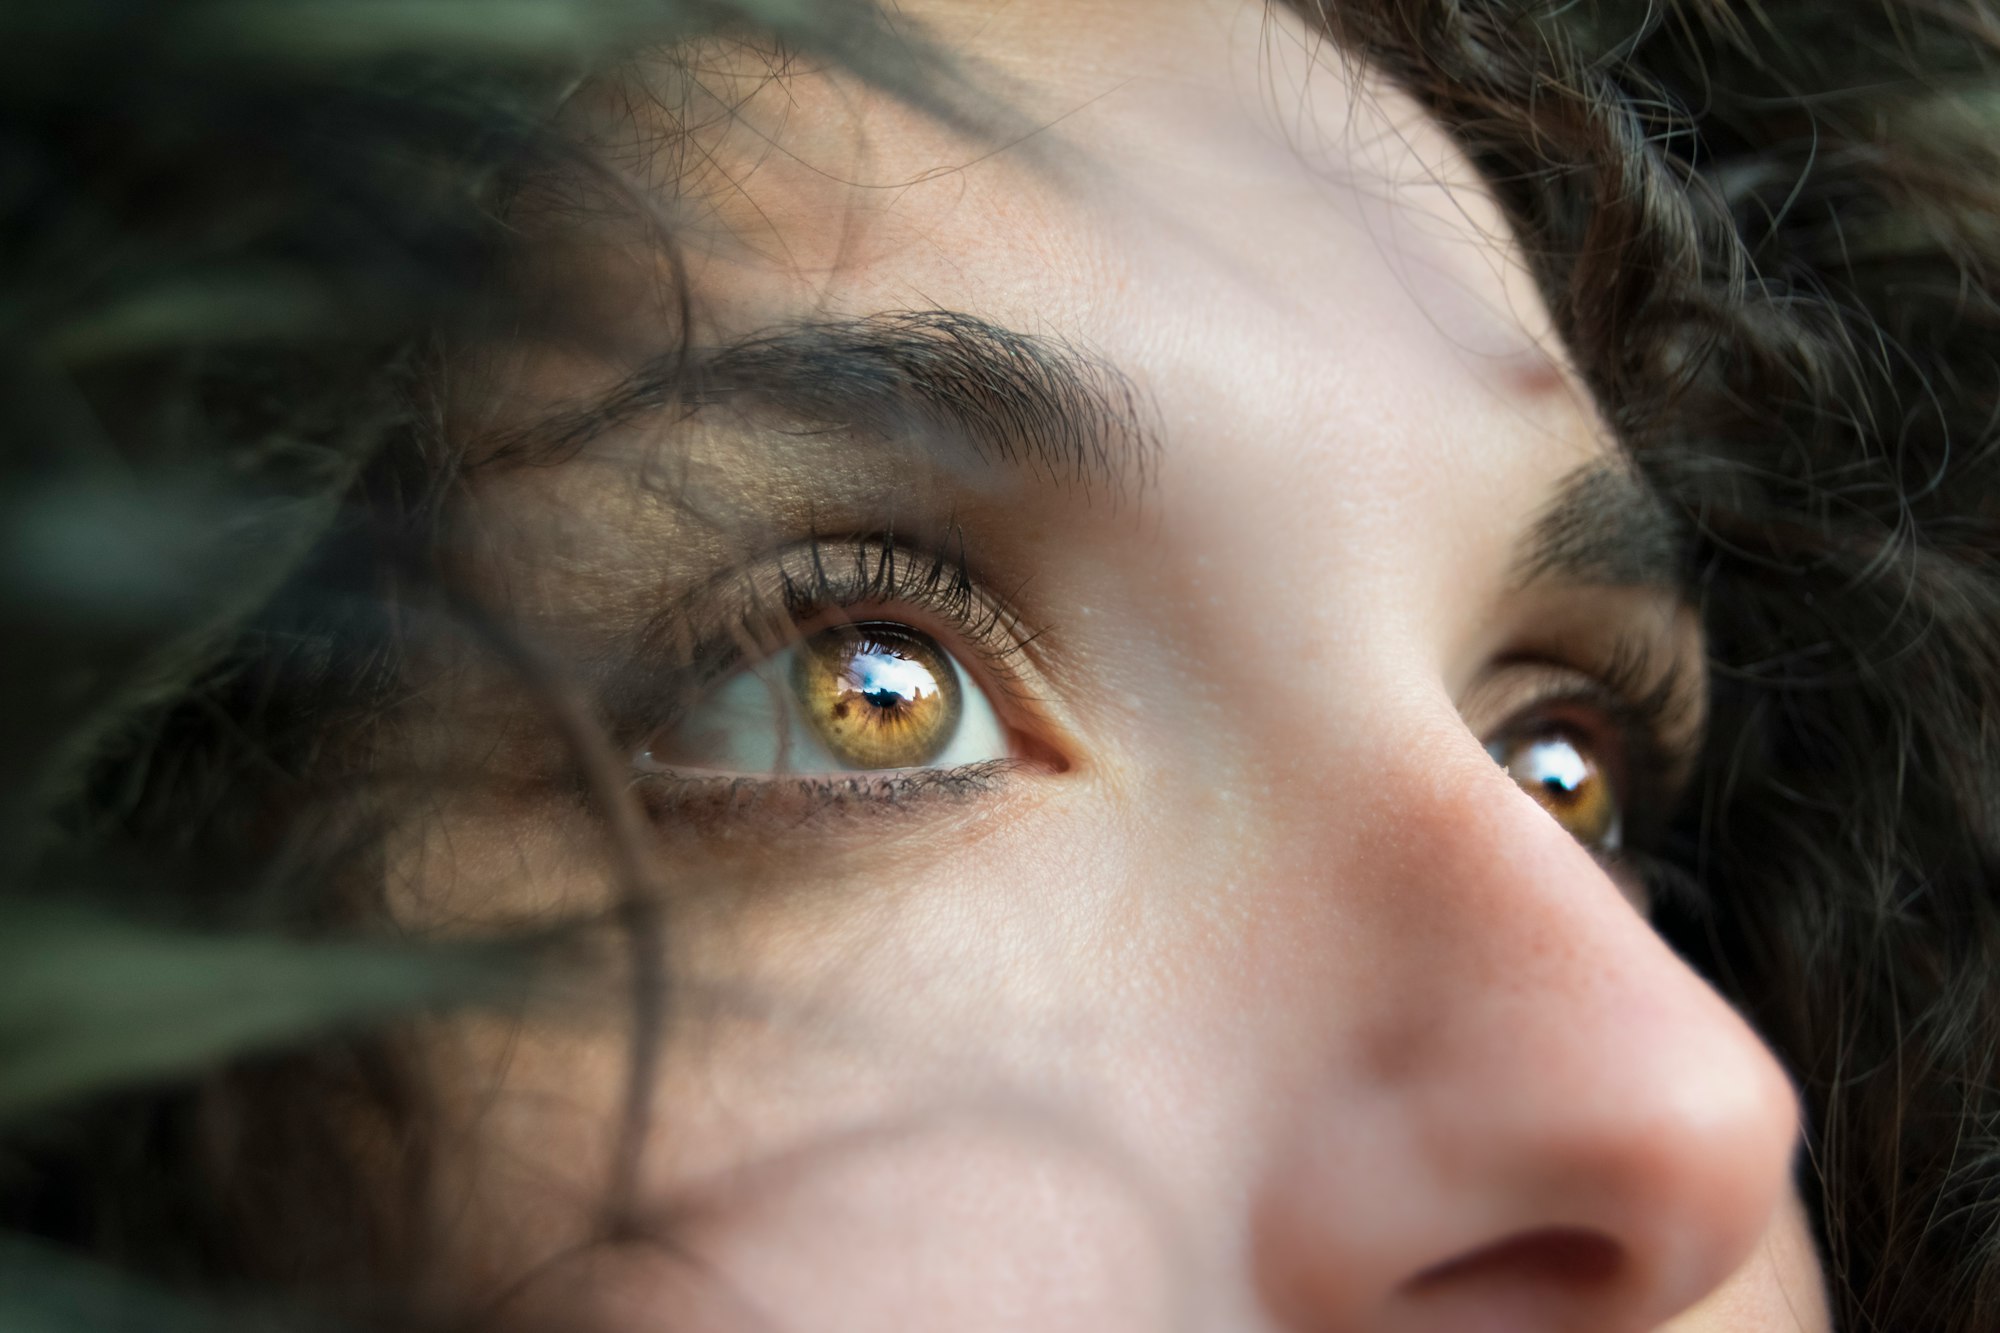 What Causes Open Eye Hallucinations?